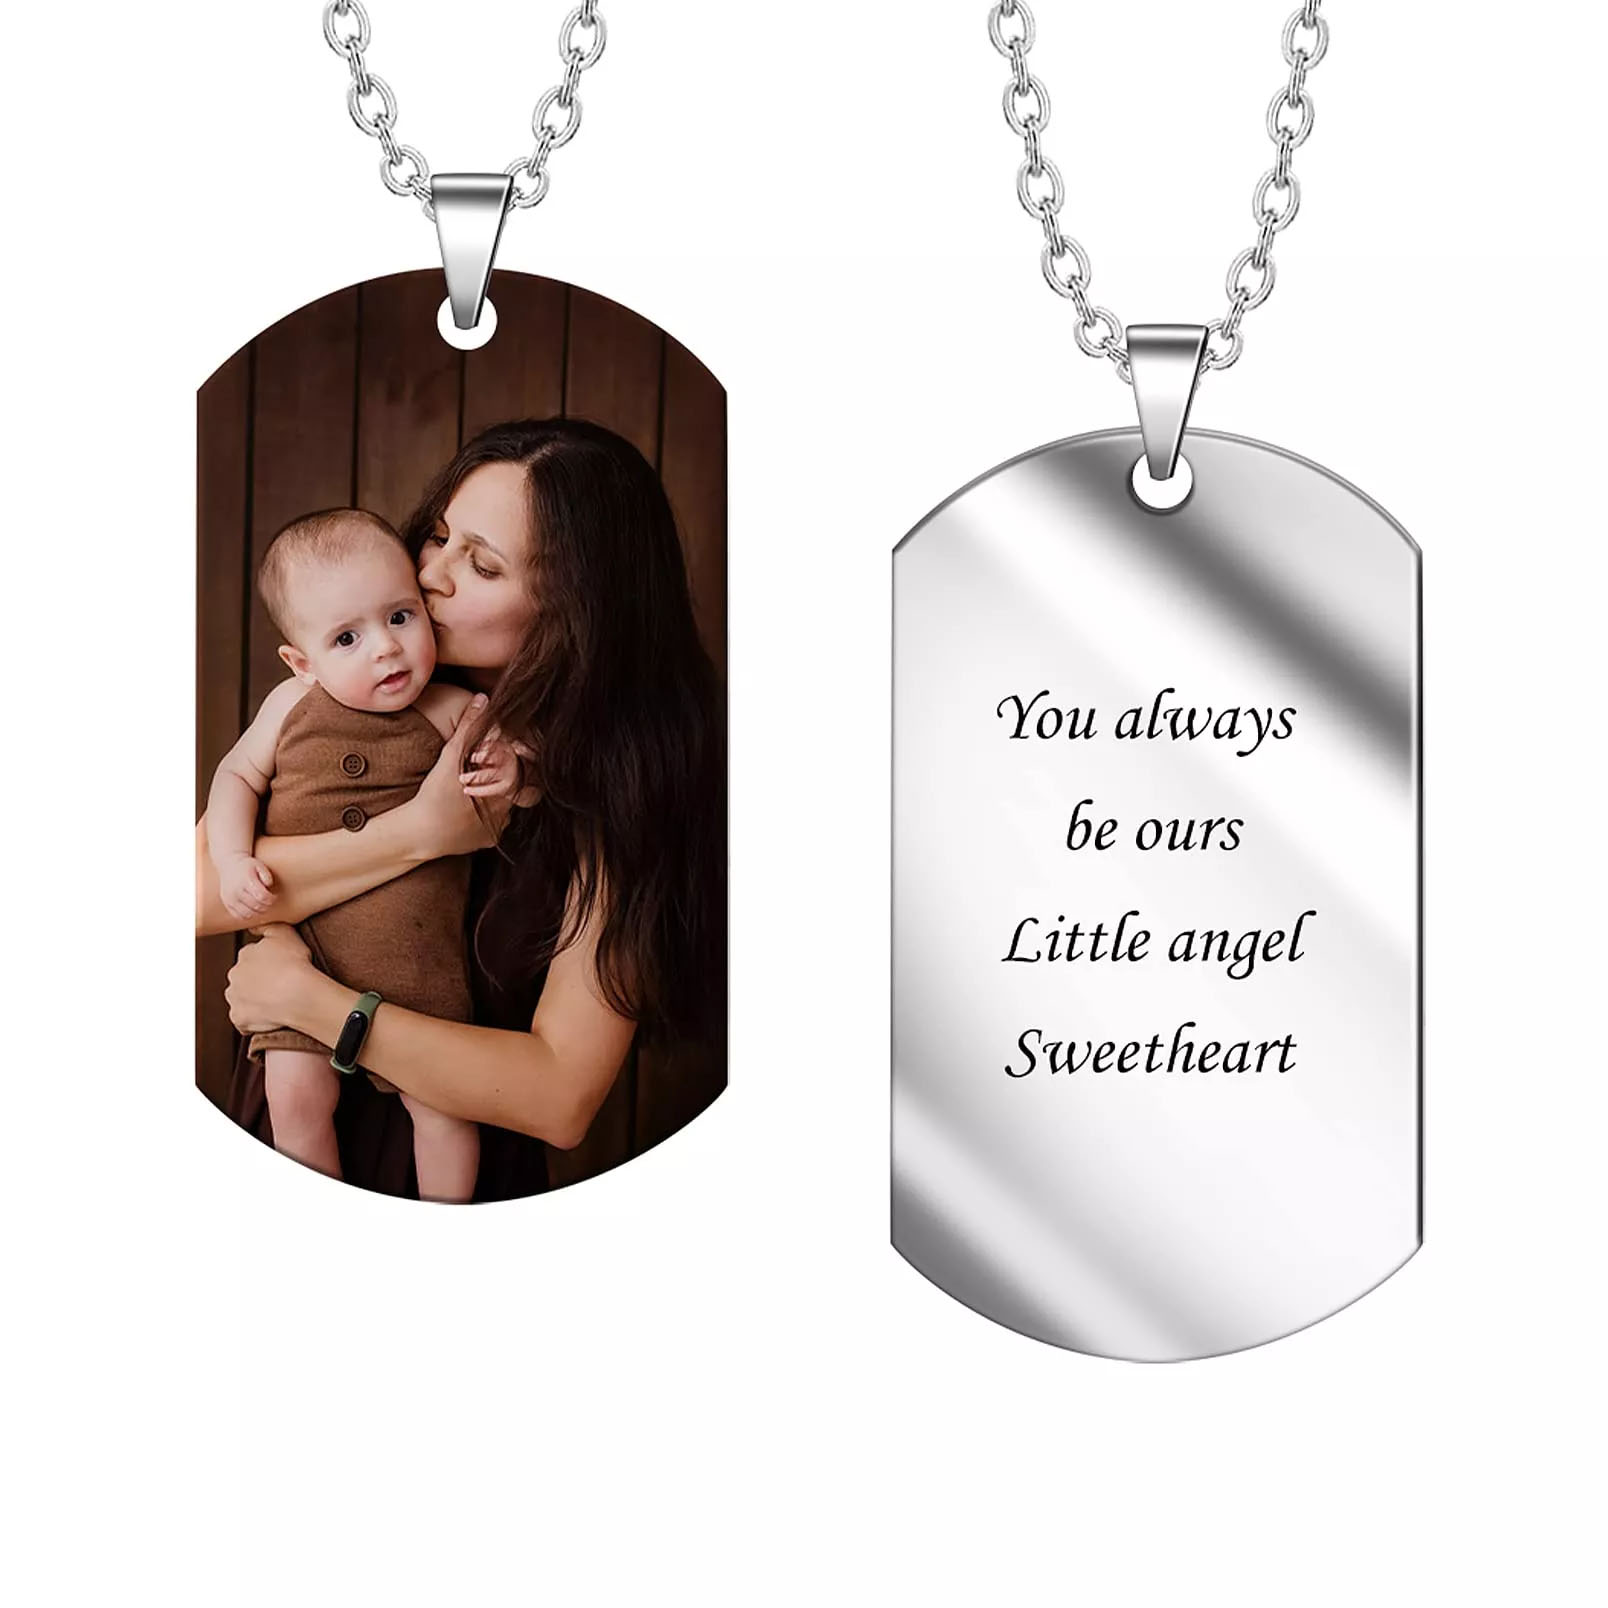 Custom Picture Necklace with Engraved Text